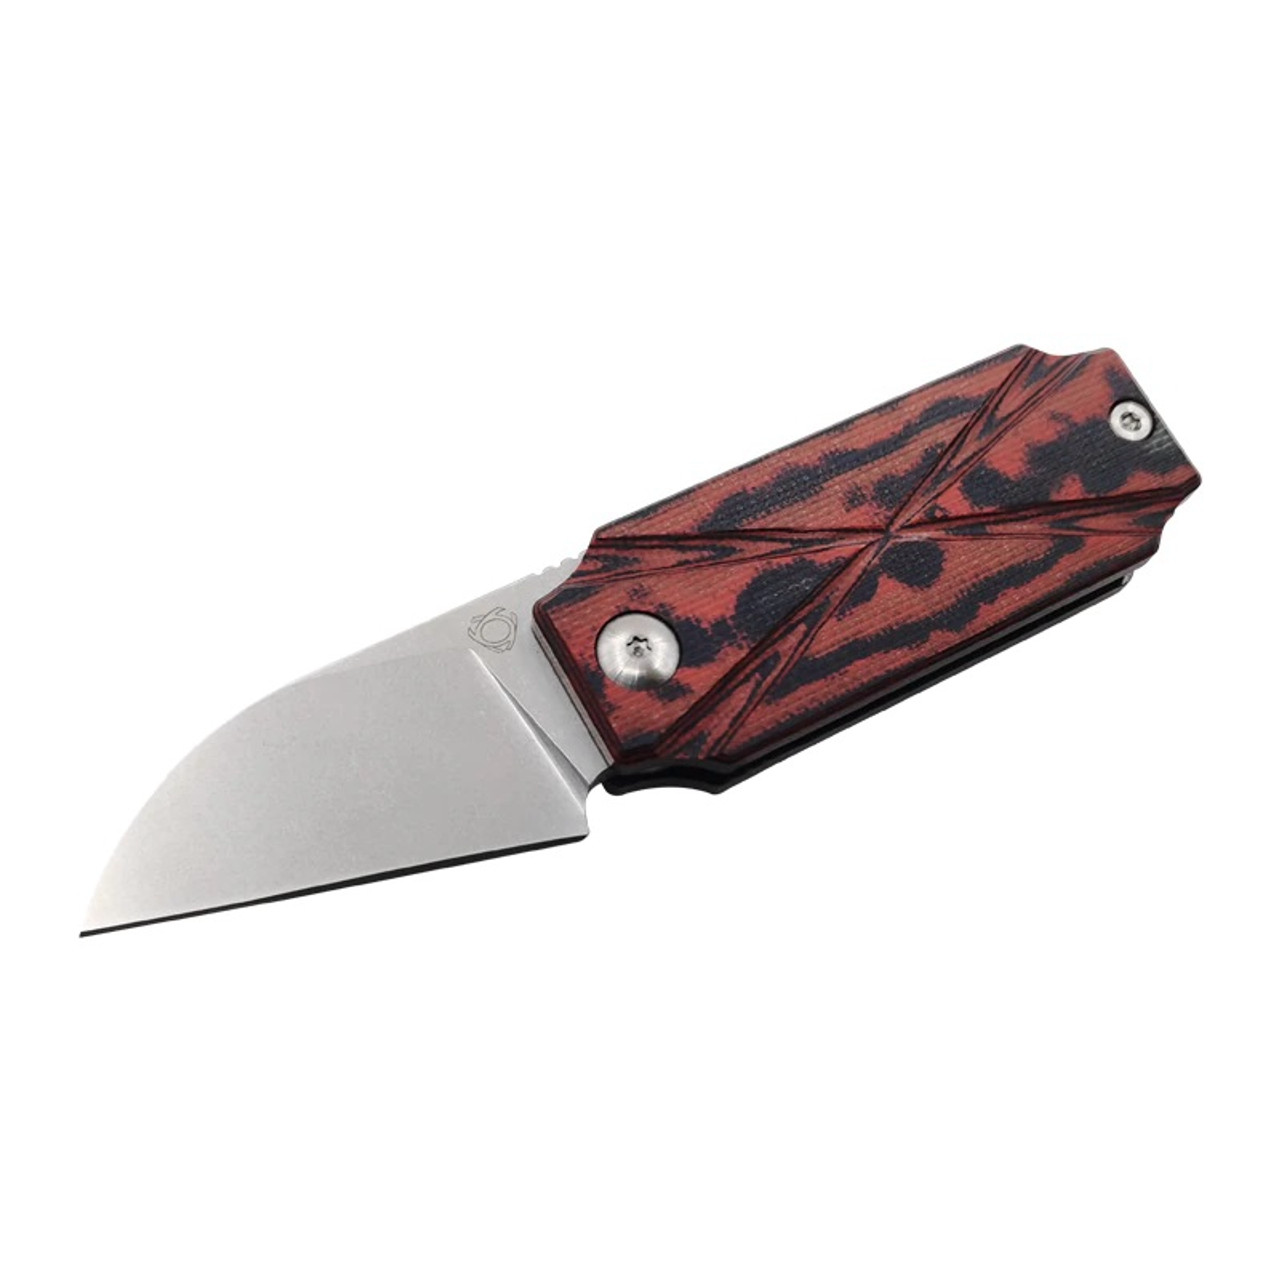 product image for SixLeaf SL-13 Chaotic Red Folding Knife